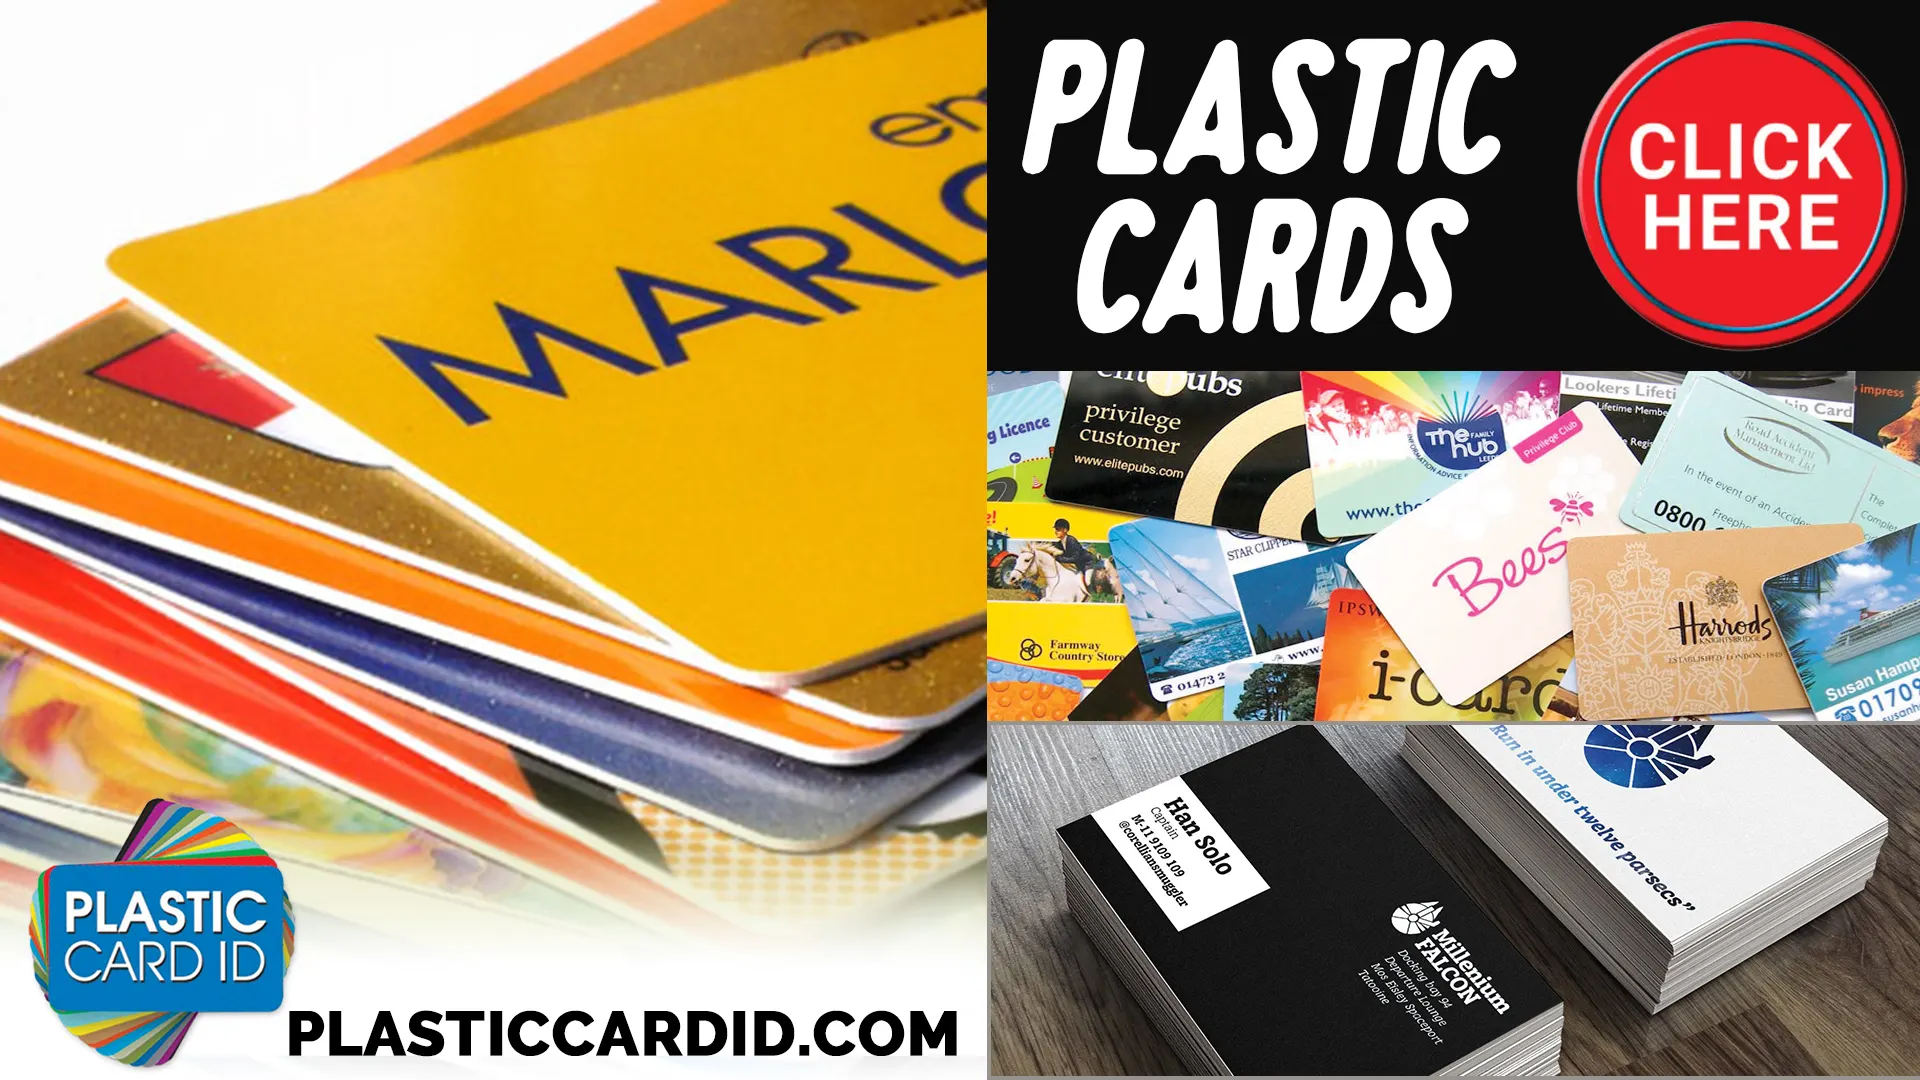 Welcome to Professional Card Printer Maintenance with Plastic Card ID
